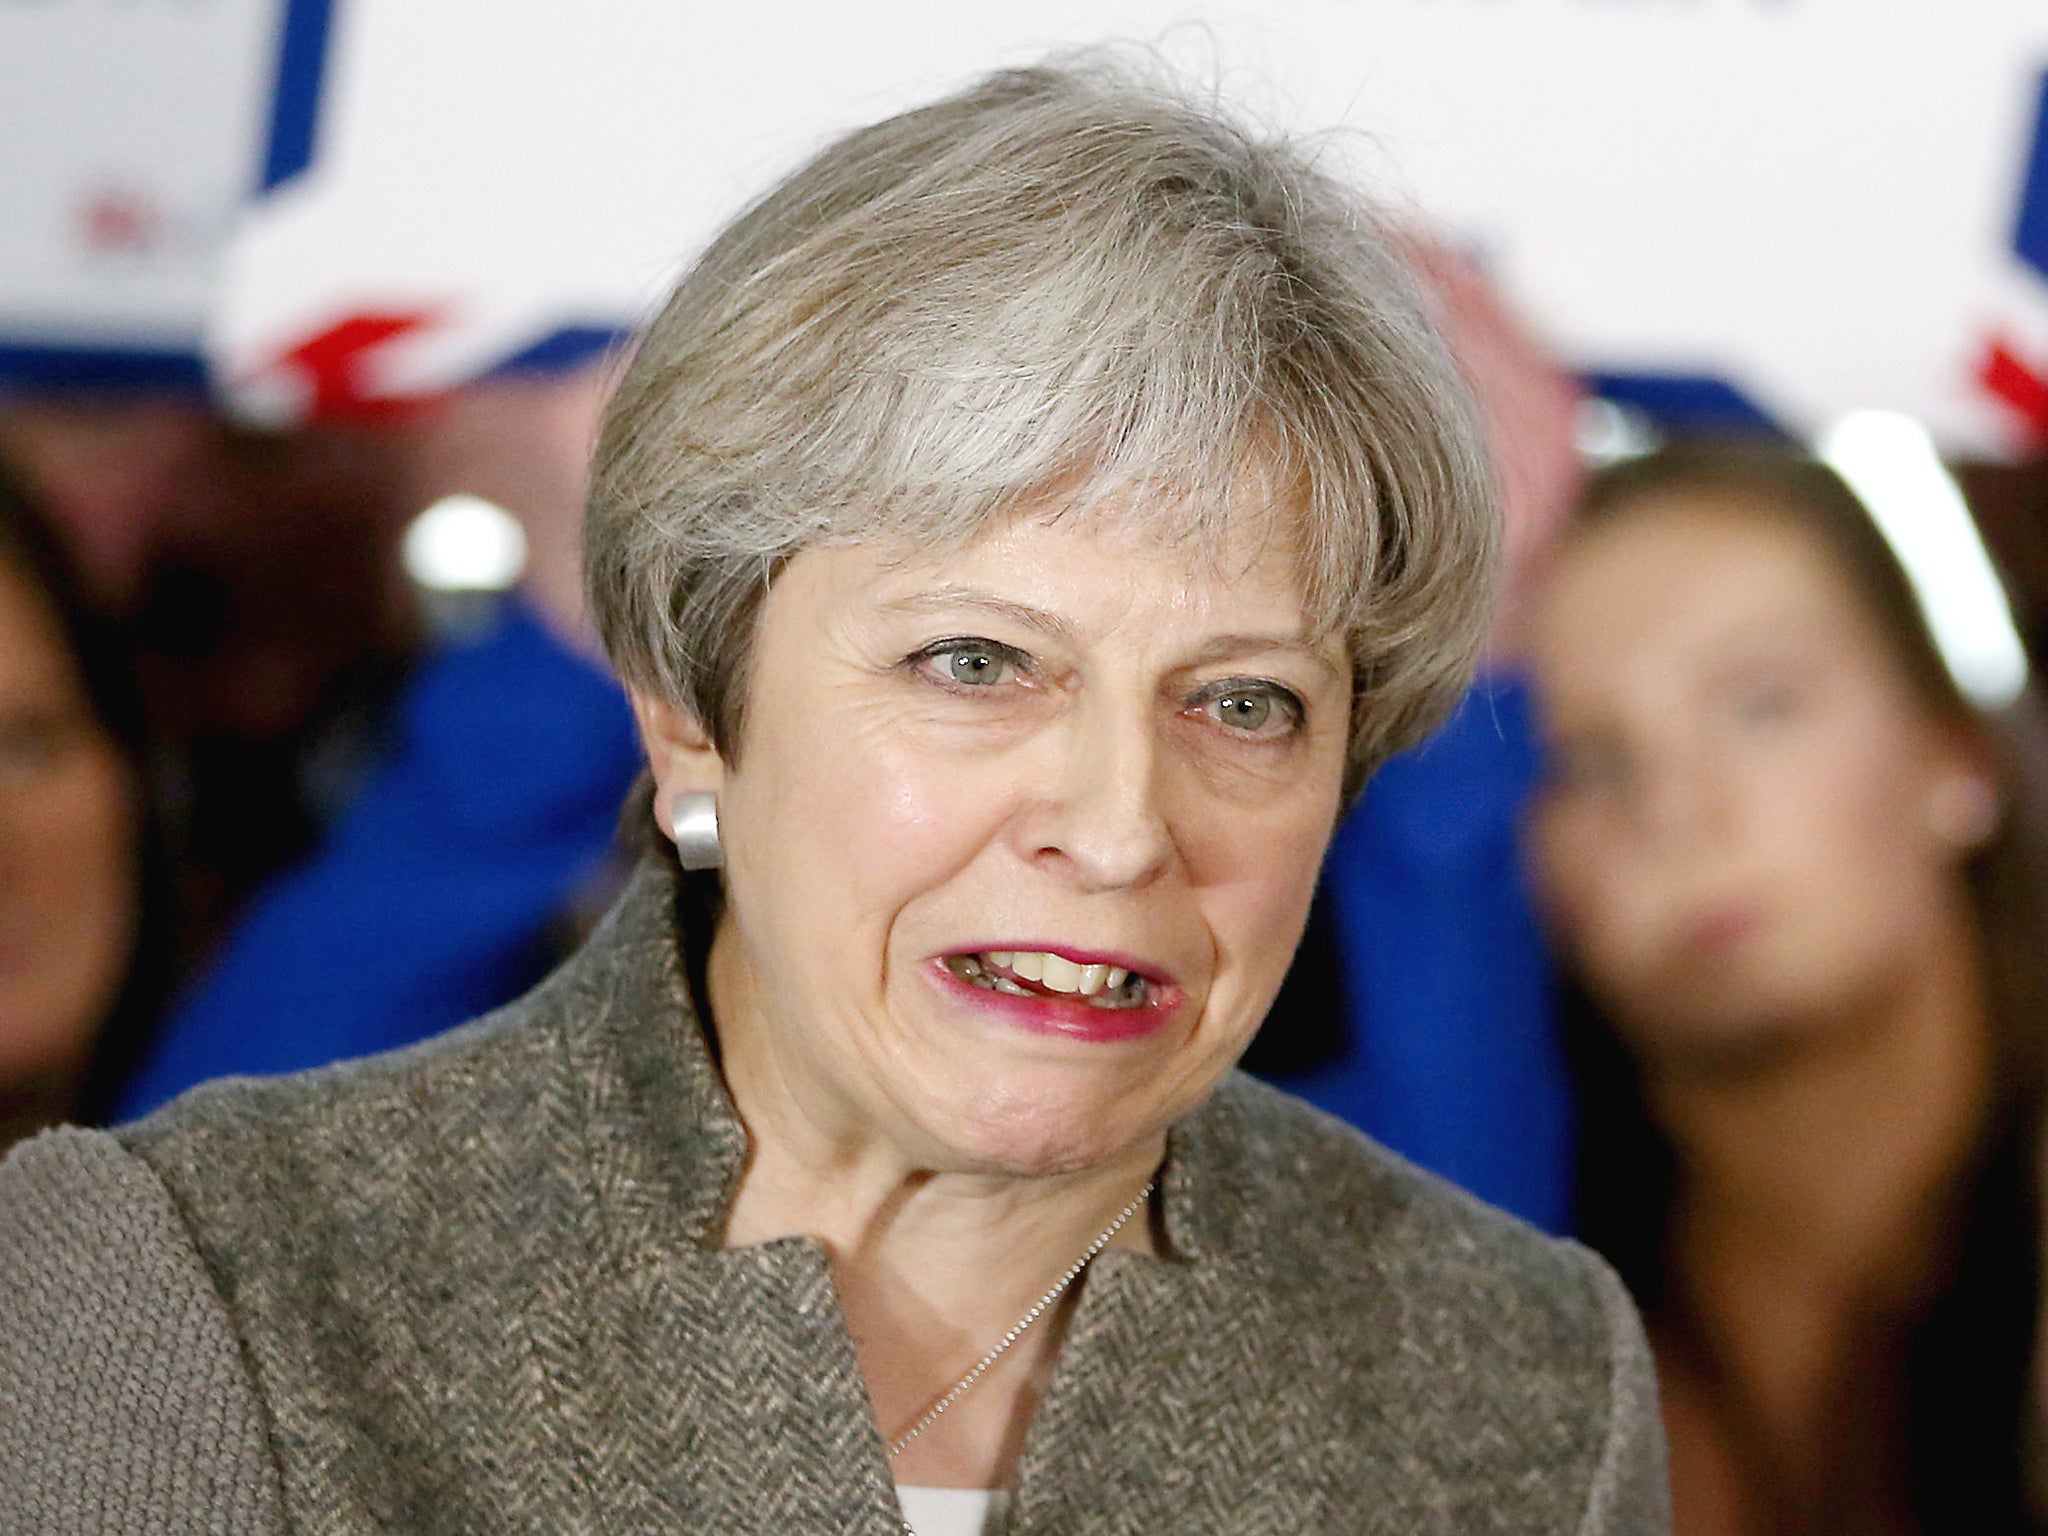 Ms May is skewered in the song for U-turns, and 'lies' on NHS, education and poverty